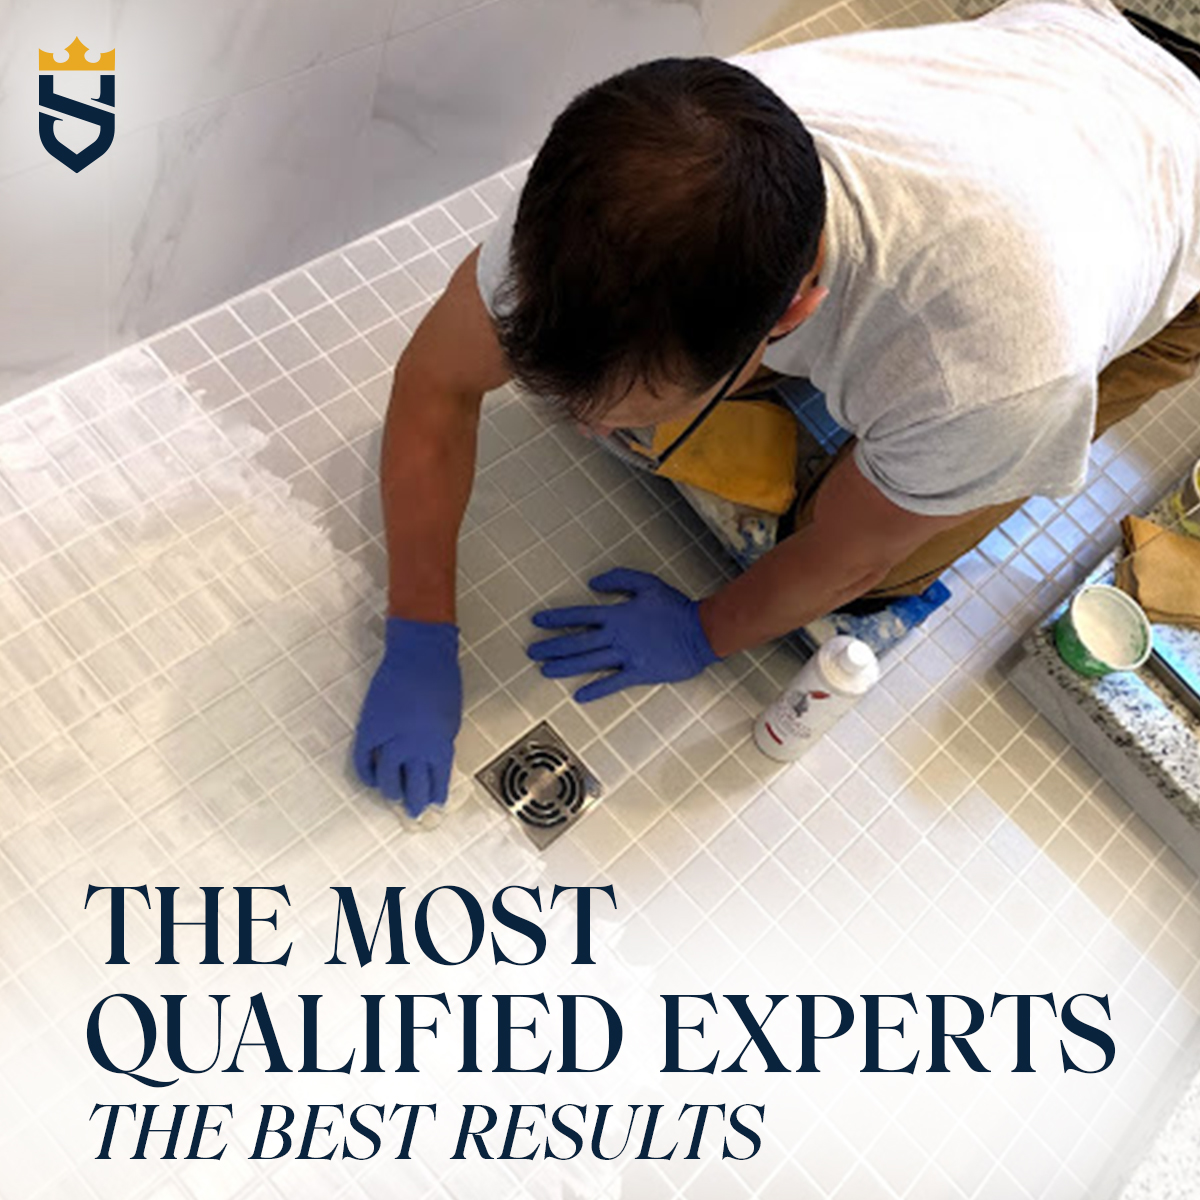 The most qualified experts. The best results.